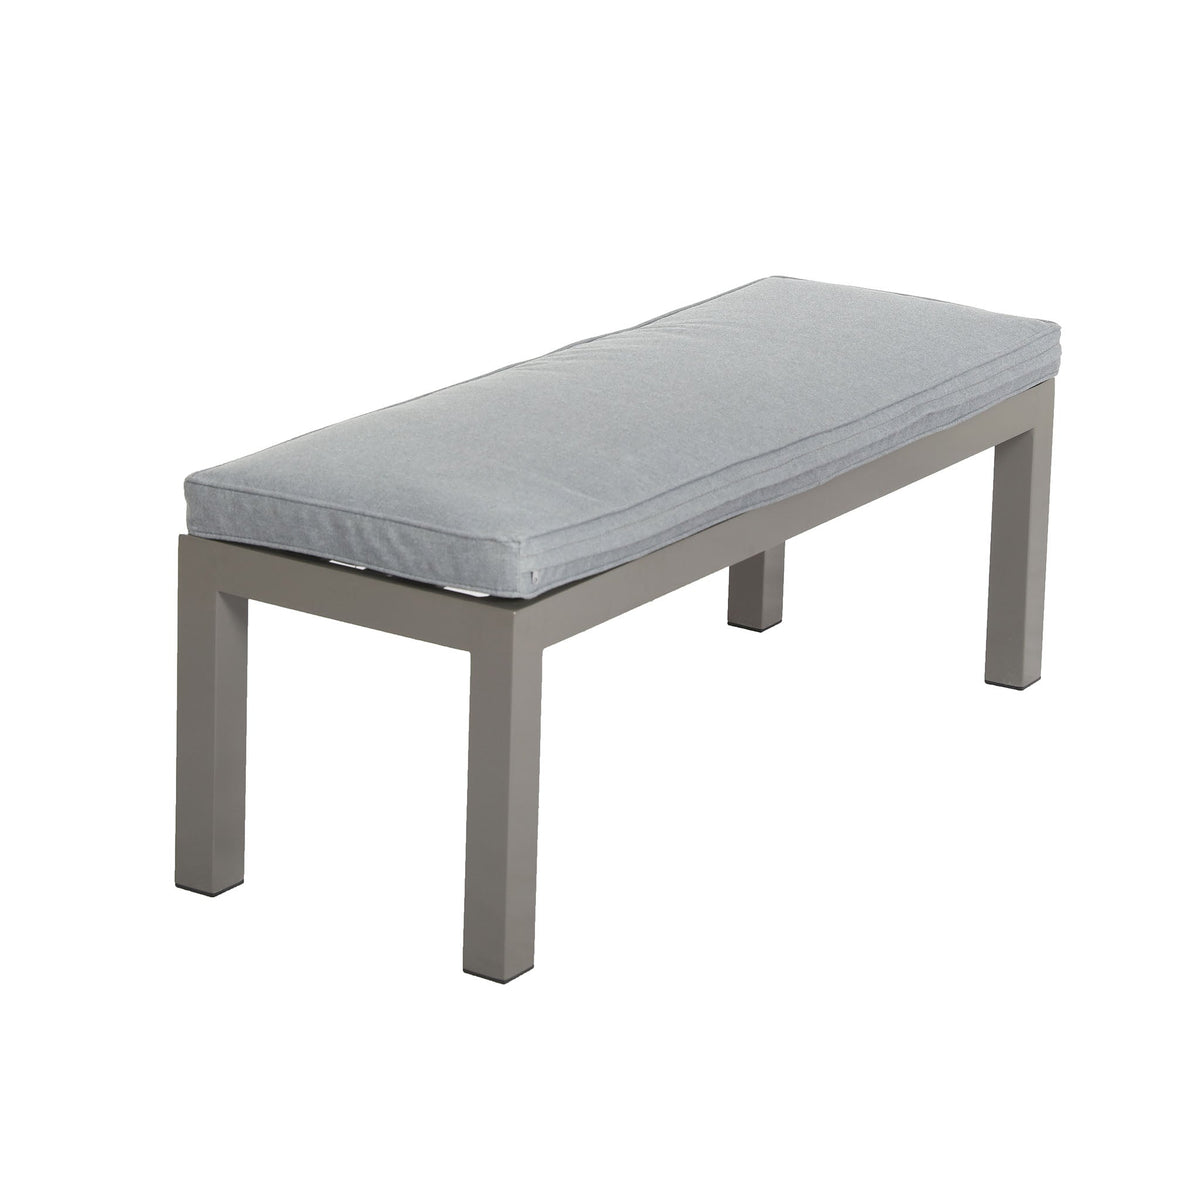 Mayfair 150cm Grey Outdoor Corner Fire Pit Table Lounge Set Bench